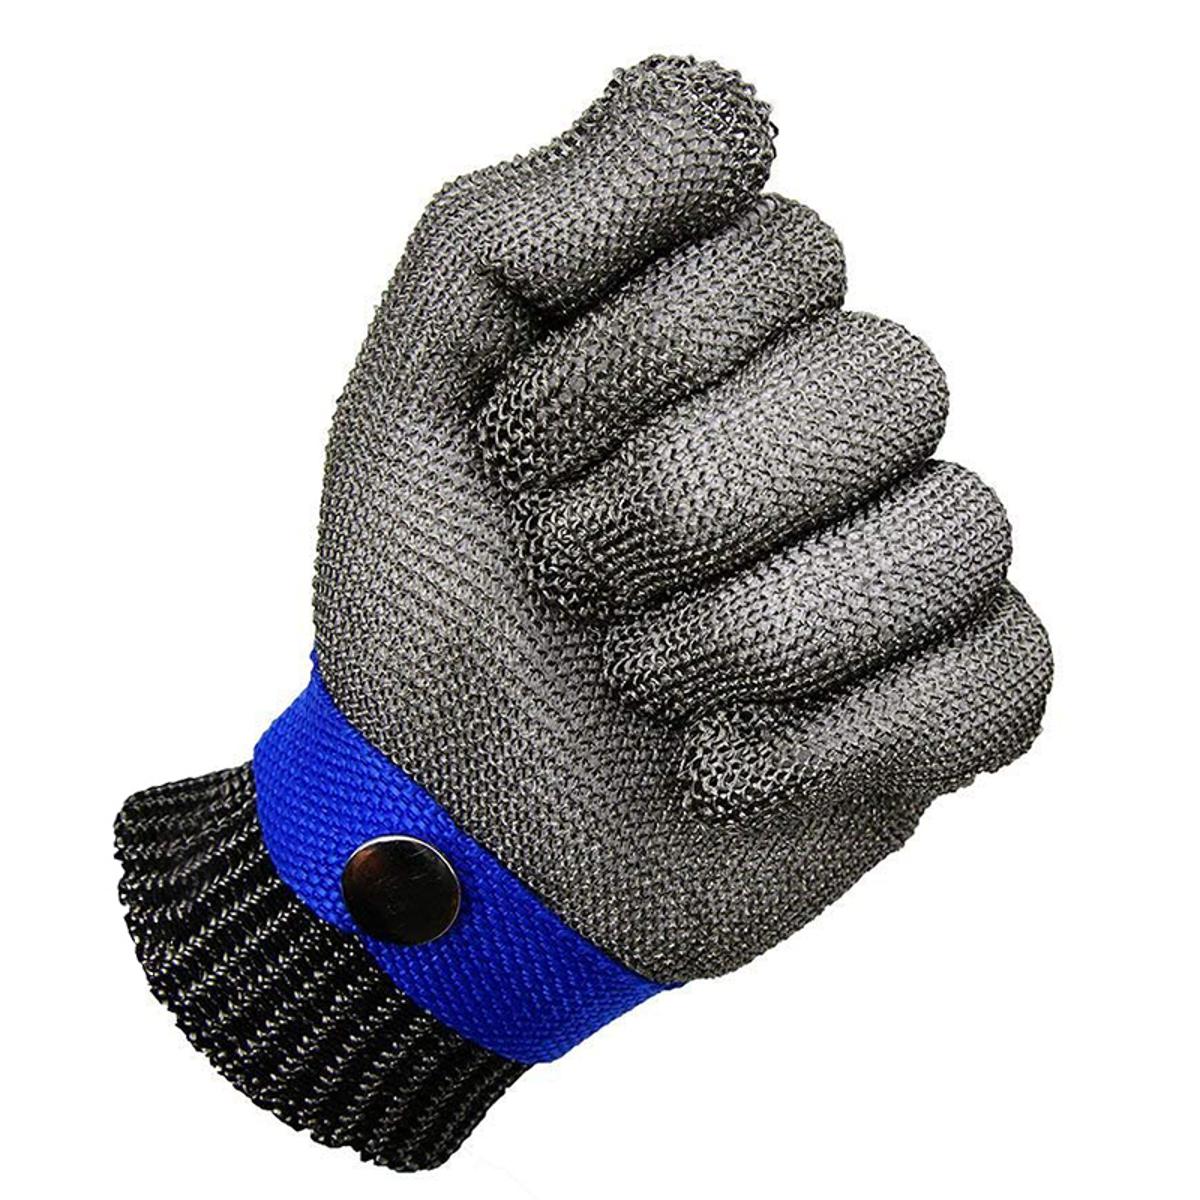 Blue Safety Cut Proof Stab Resistant Stainless Steel Mesh Butcher Glove  High Performance Level 5 Protection Size S